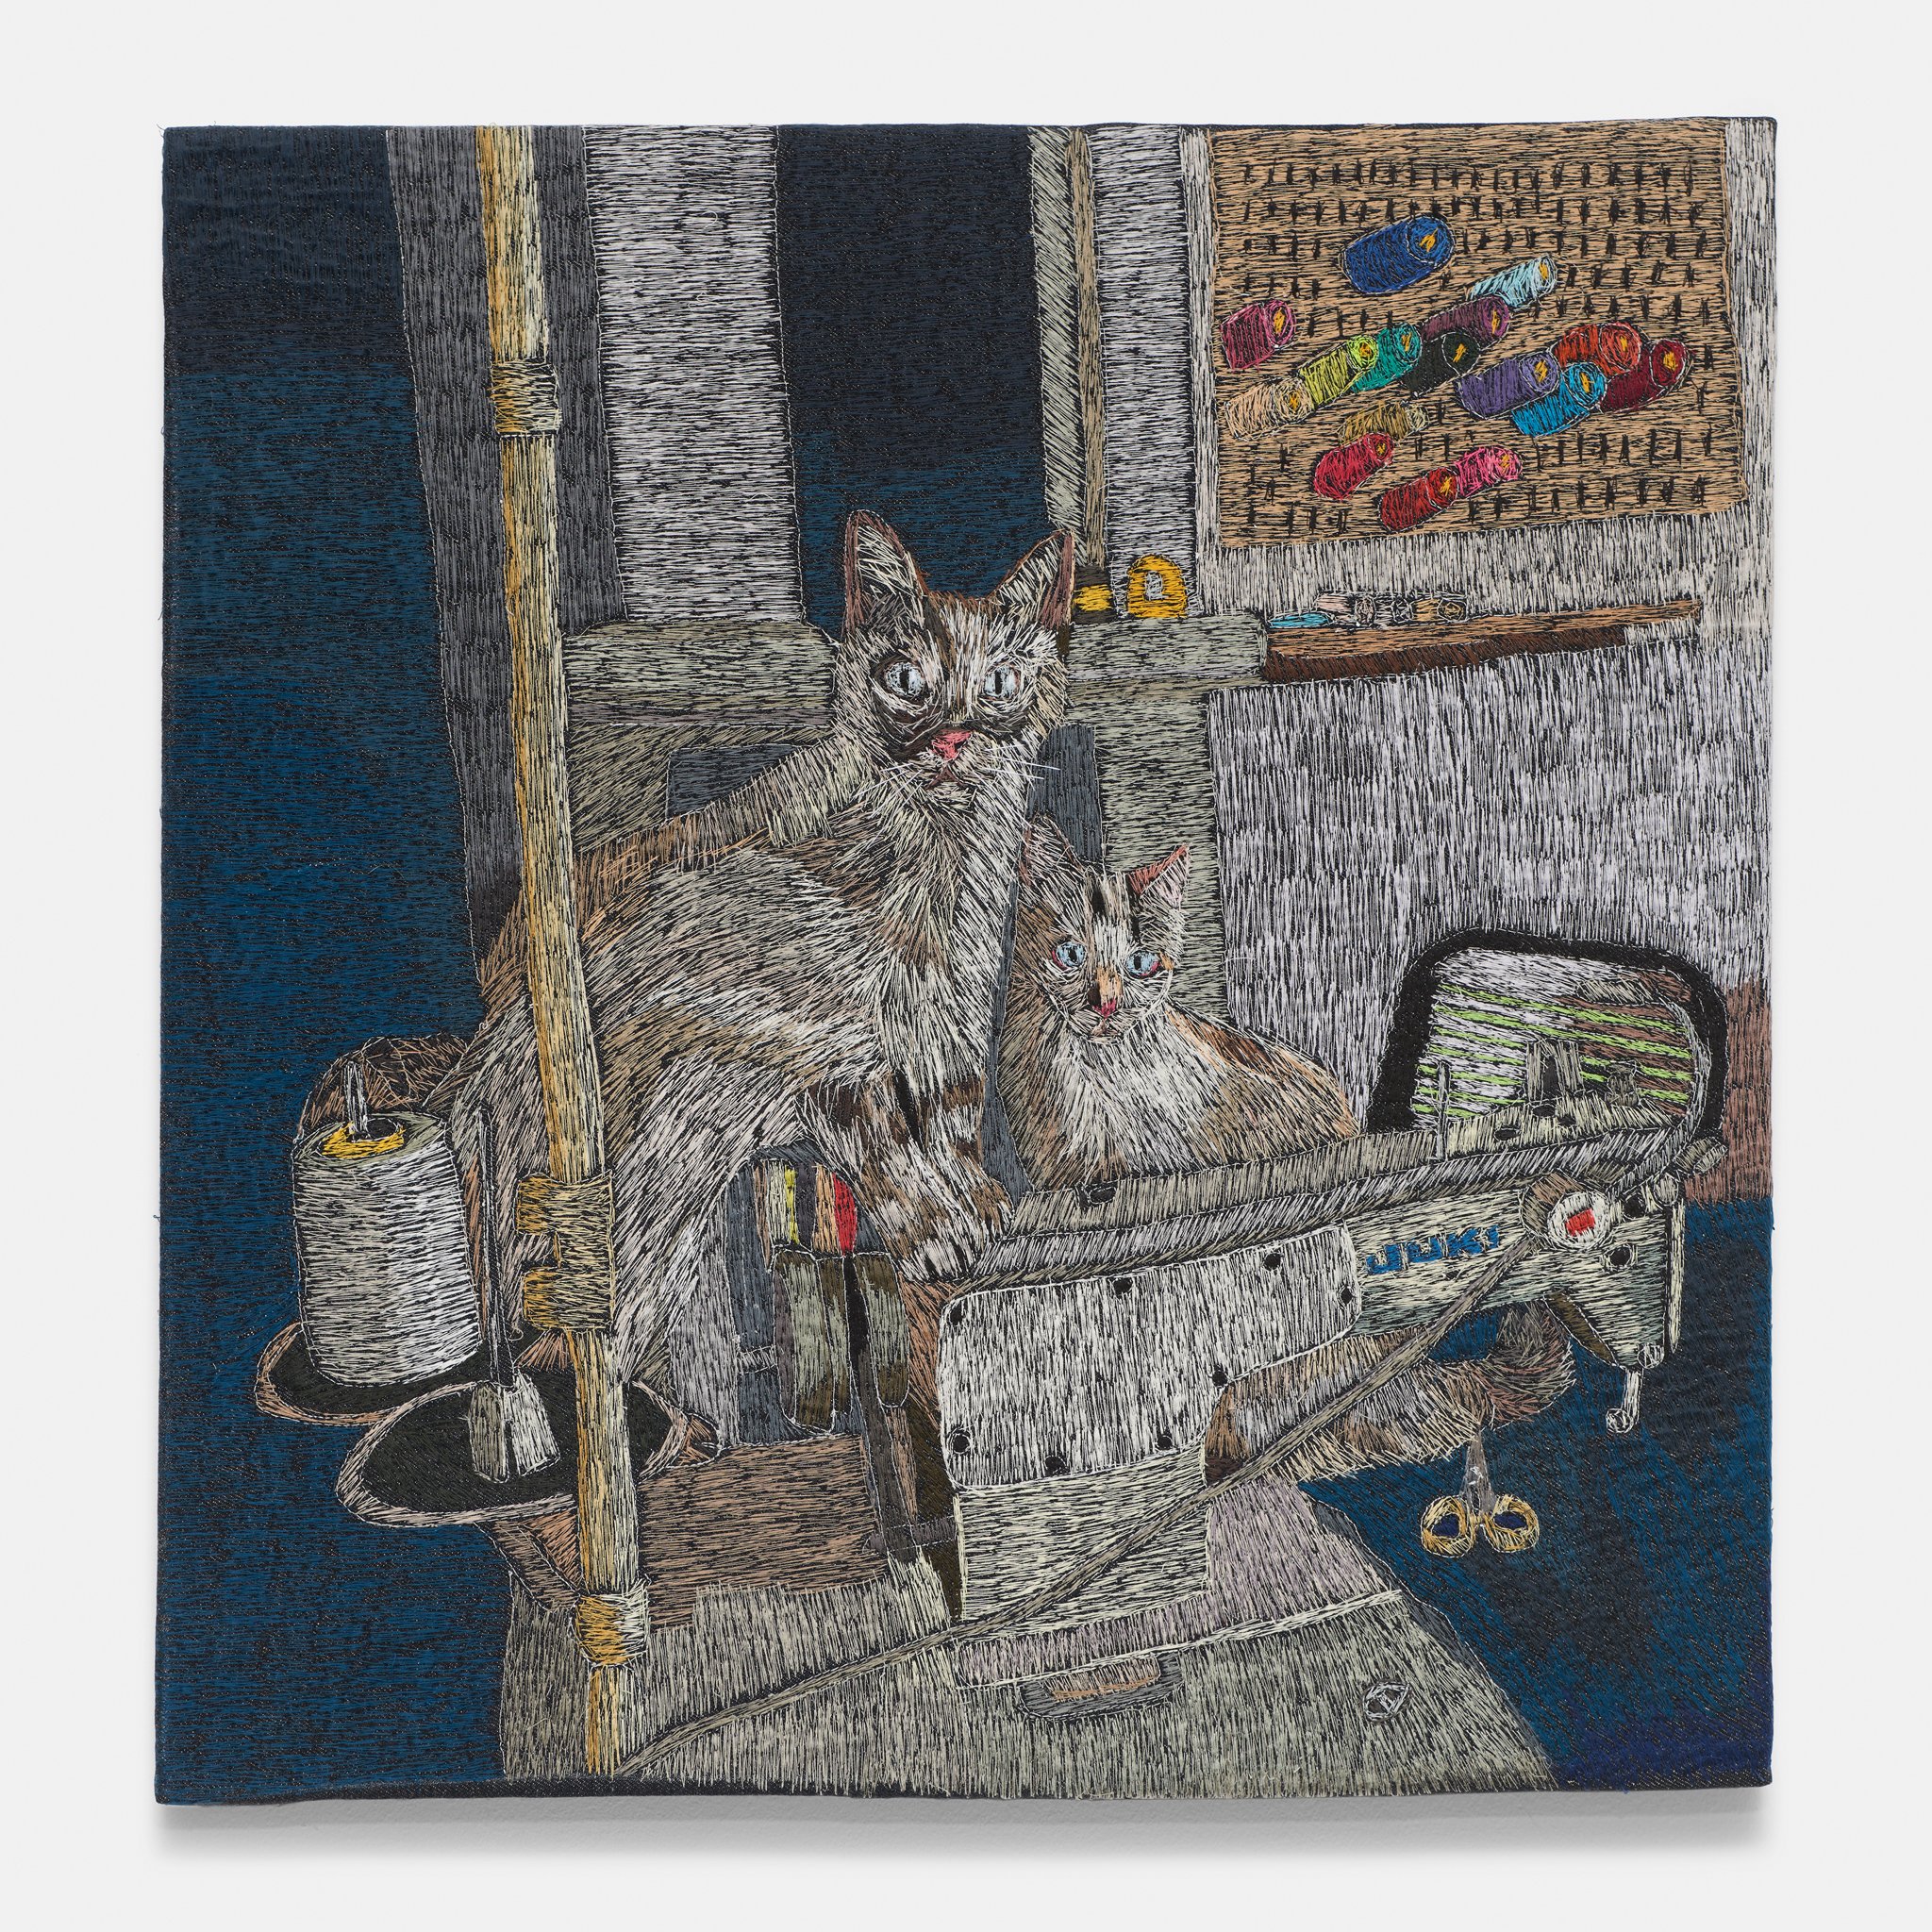  Double trouble (Friday Panchito on my sewing machine), 2022  24 1/5 × 23 1/5 × 1 7/10 in   Polyester thread on denim 